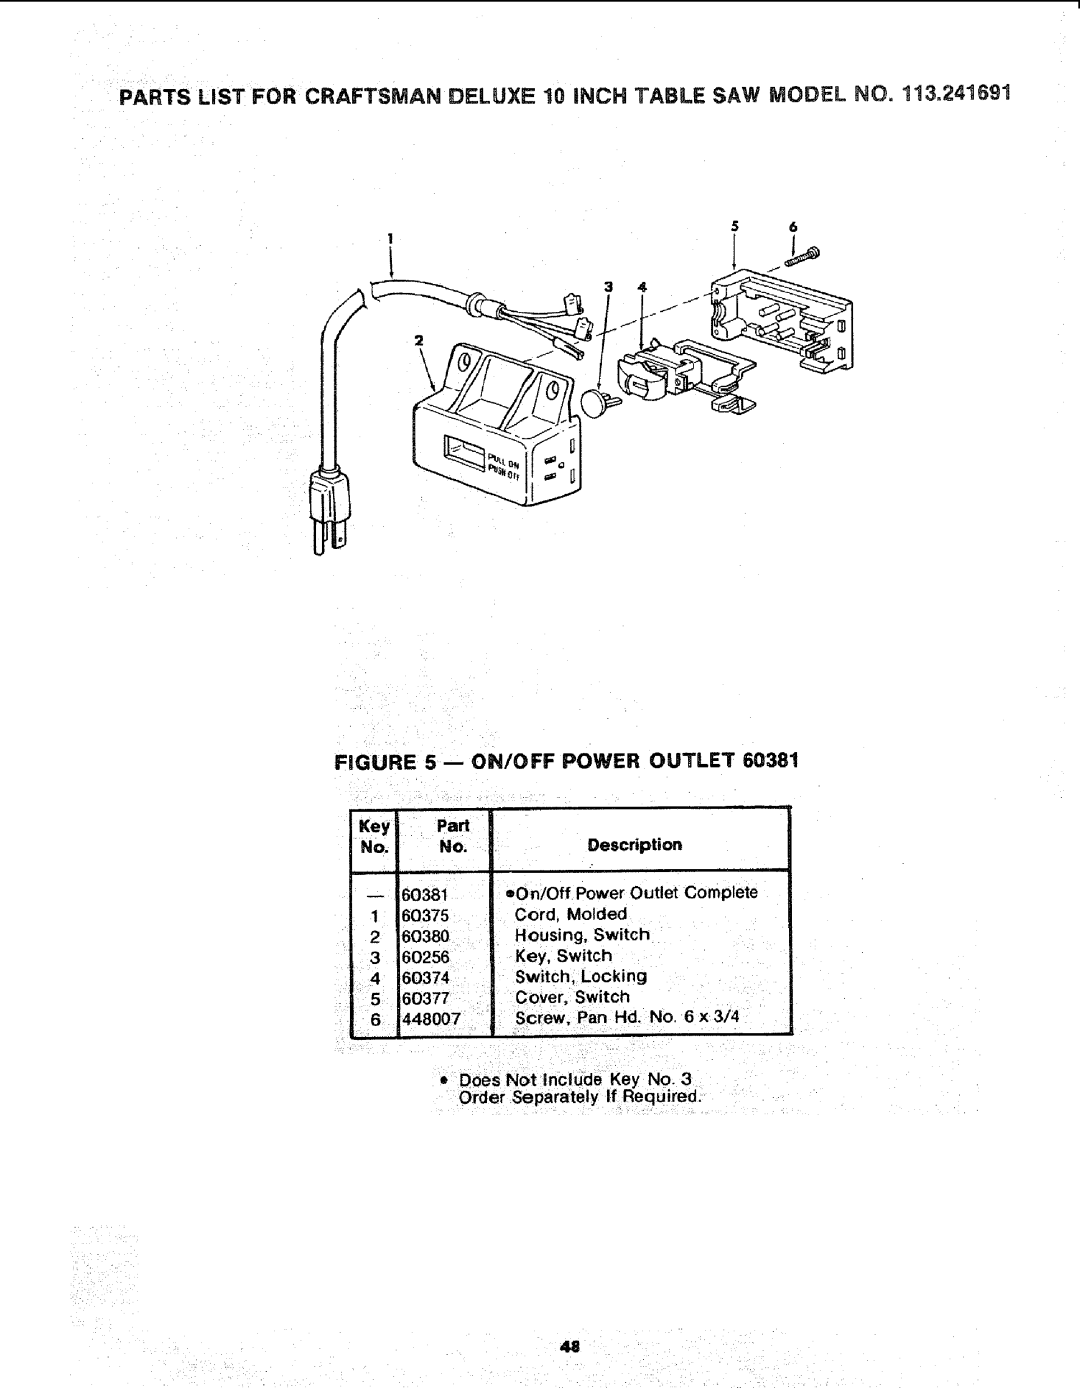 Sears 113.241591 owner manual On/Off Power Outlet, 6 x 3/4 